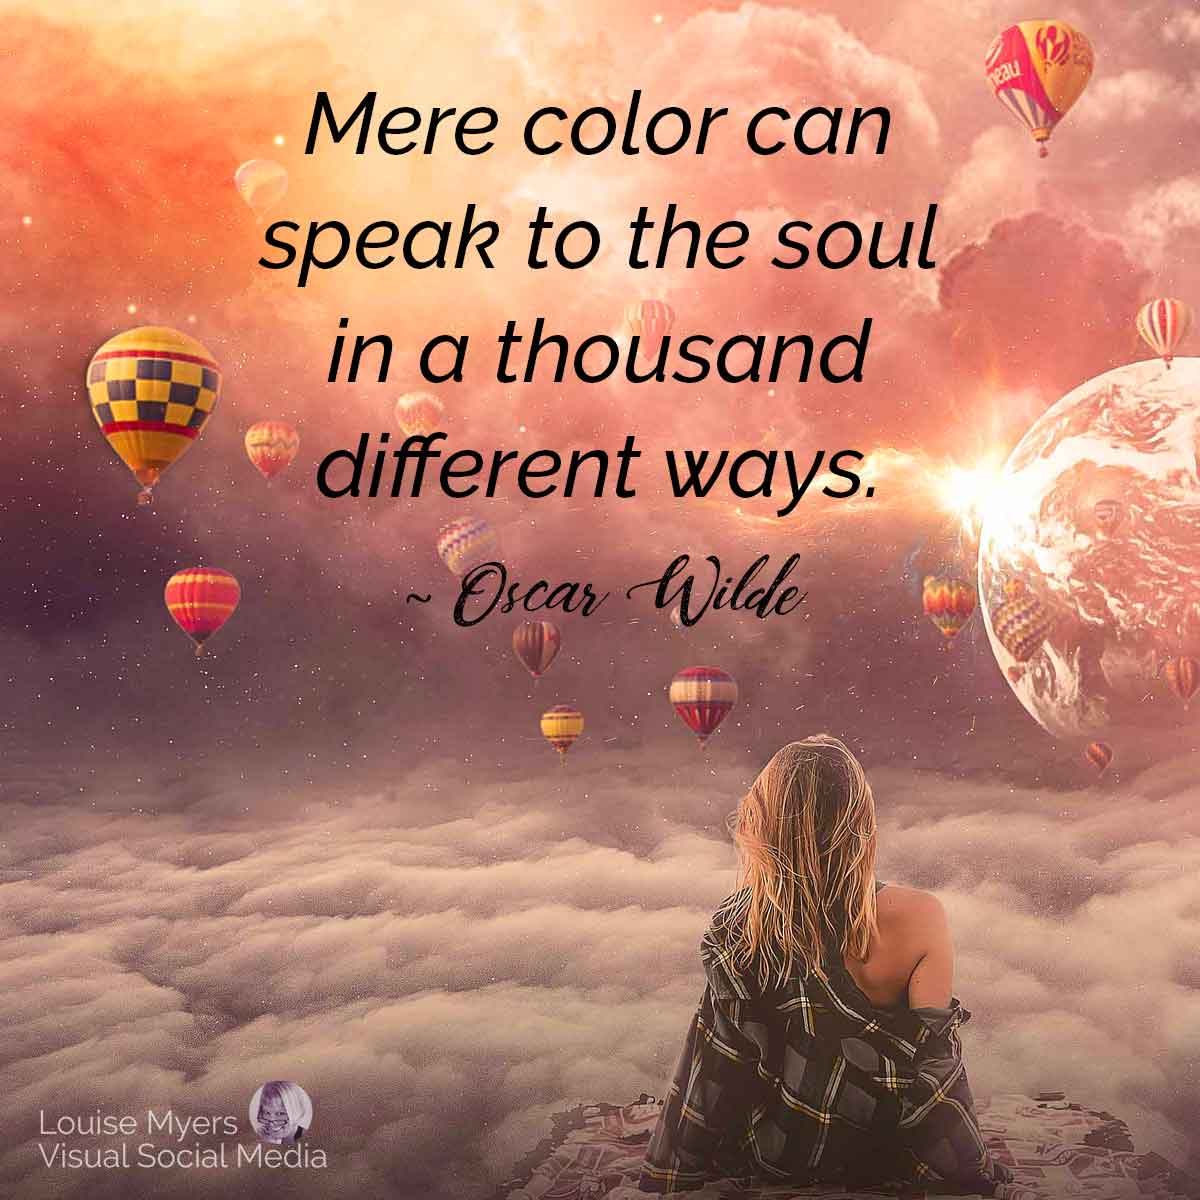 woman looking at colorful sky with hot air balloons and quote overlay about mere color can speak.